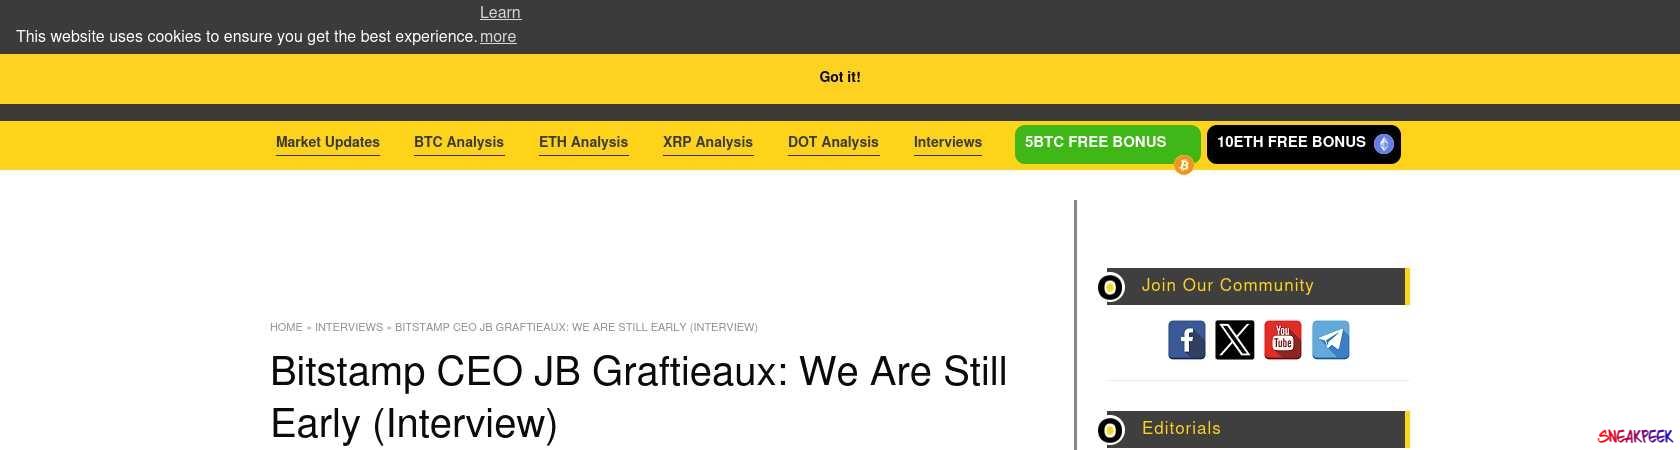 Read the full Article:  ⭲ Bitstamp CEO JB Graftieaux: We Are Still Early (Interview)